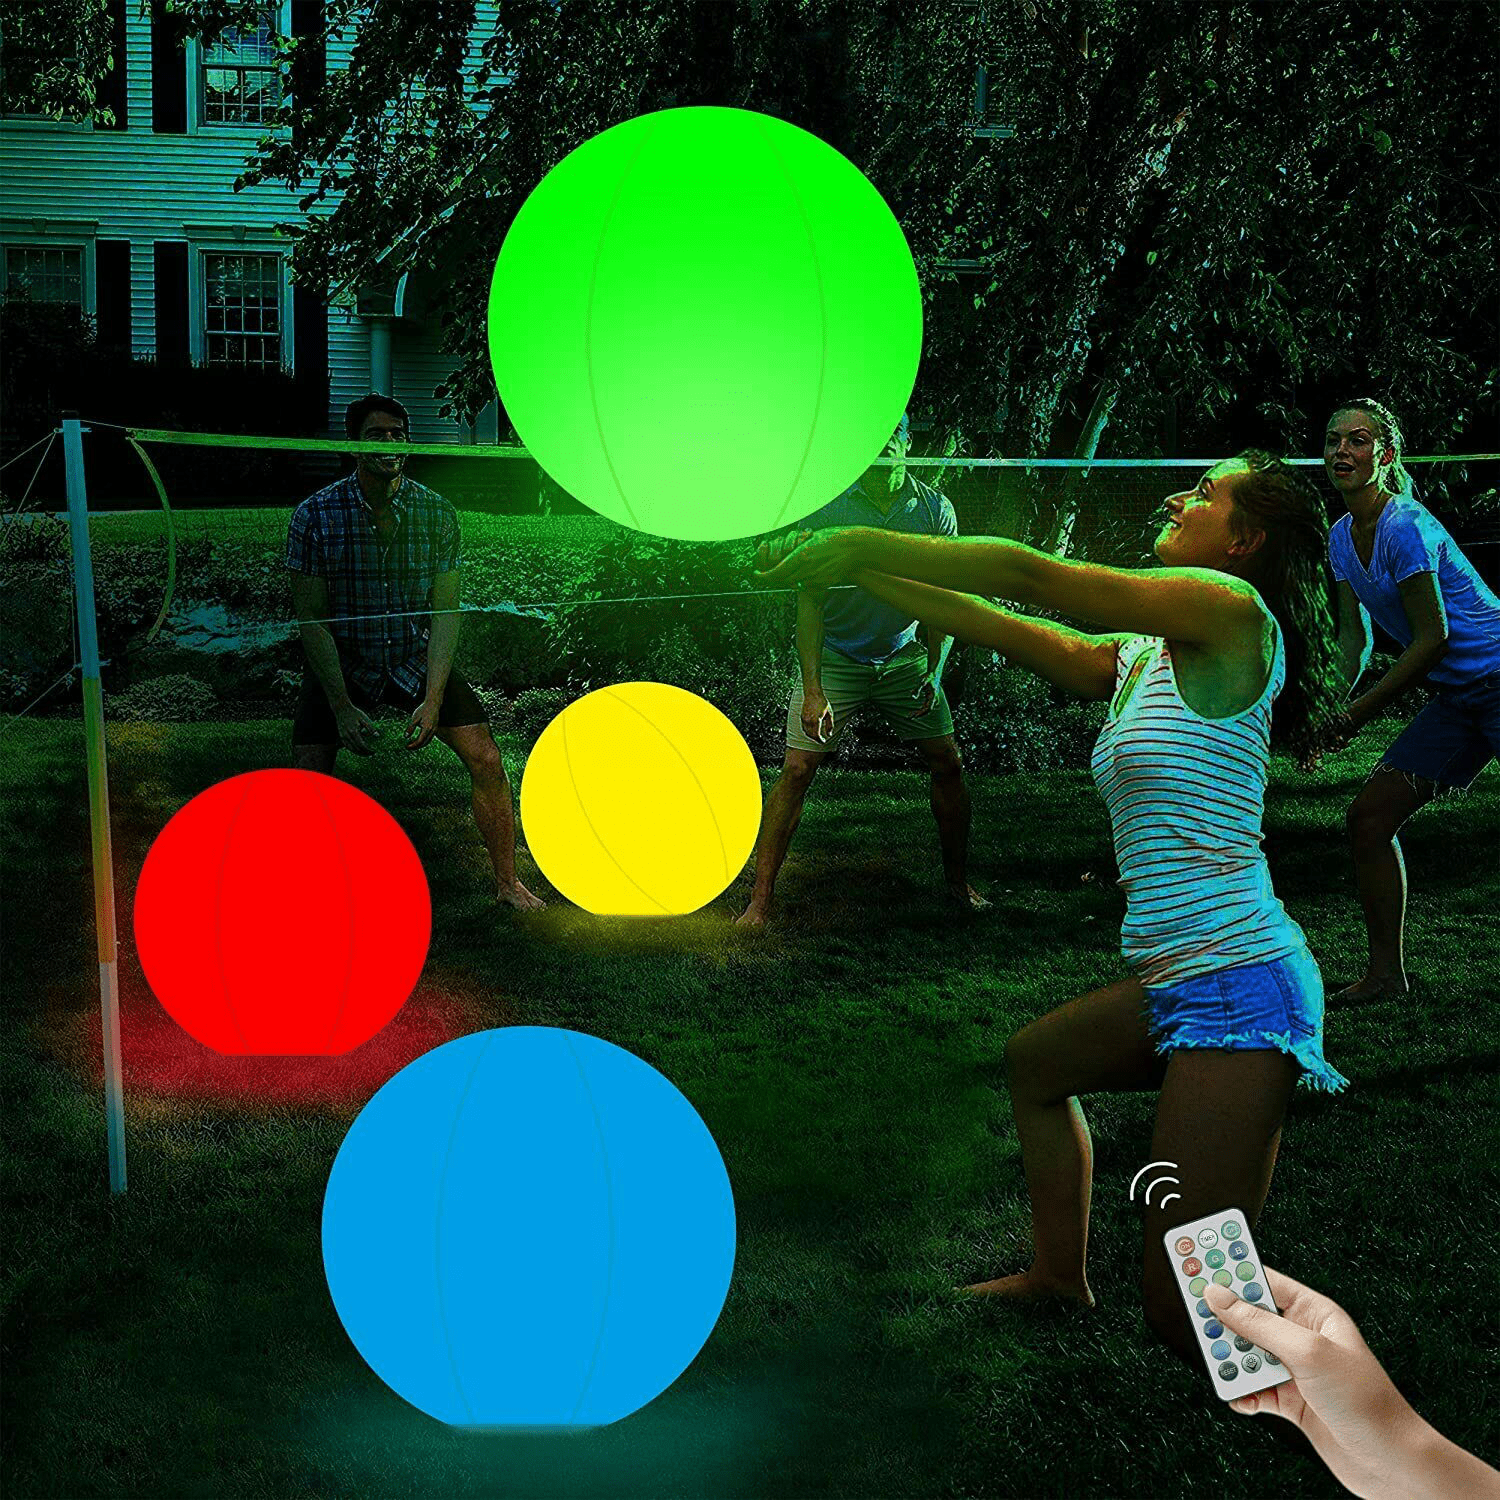 Floating Pool Lights,16” Inflatable Waterproof LED Glowing Globe ball,13 Color Changing Led Pool Balls Lights,Outdoor LED Night Lamp Beach Ball for Garden,Backyard,Party Decorations 1PC